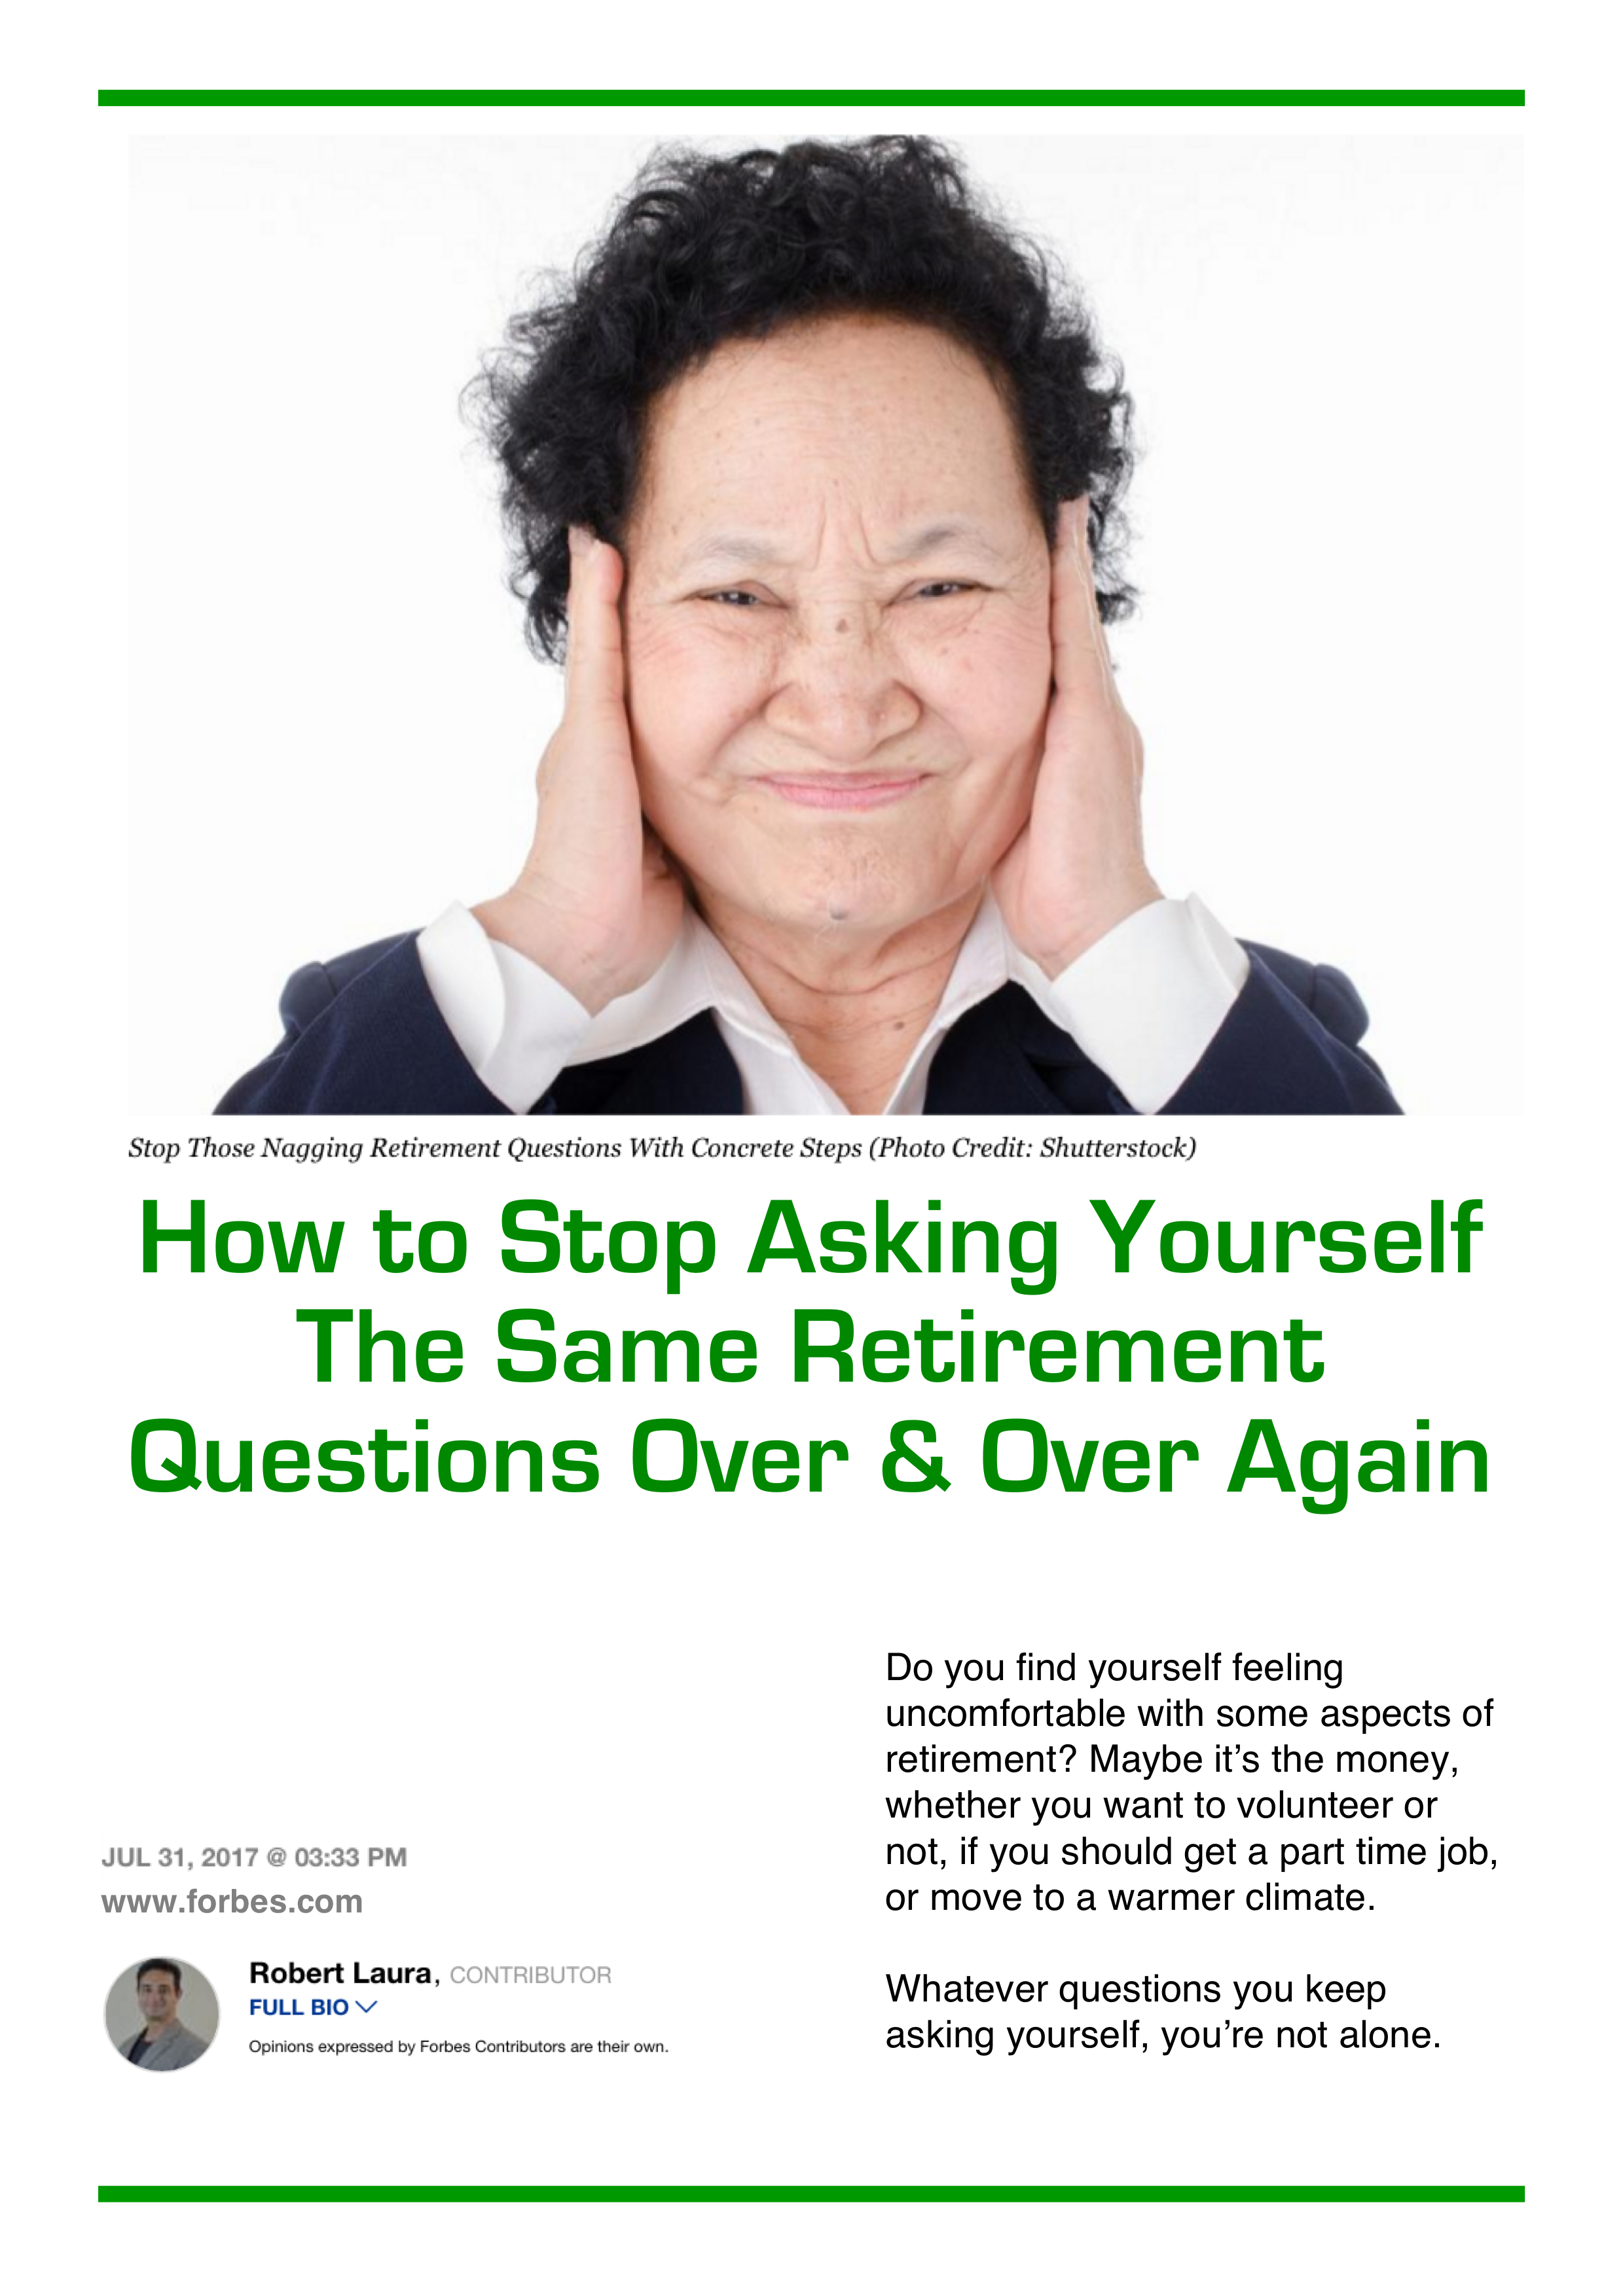 How to Stop Asking Yourself The Same Retirement Questions Over and Over Again